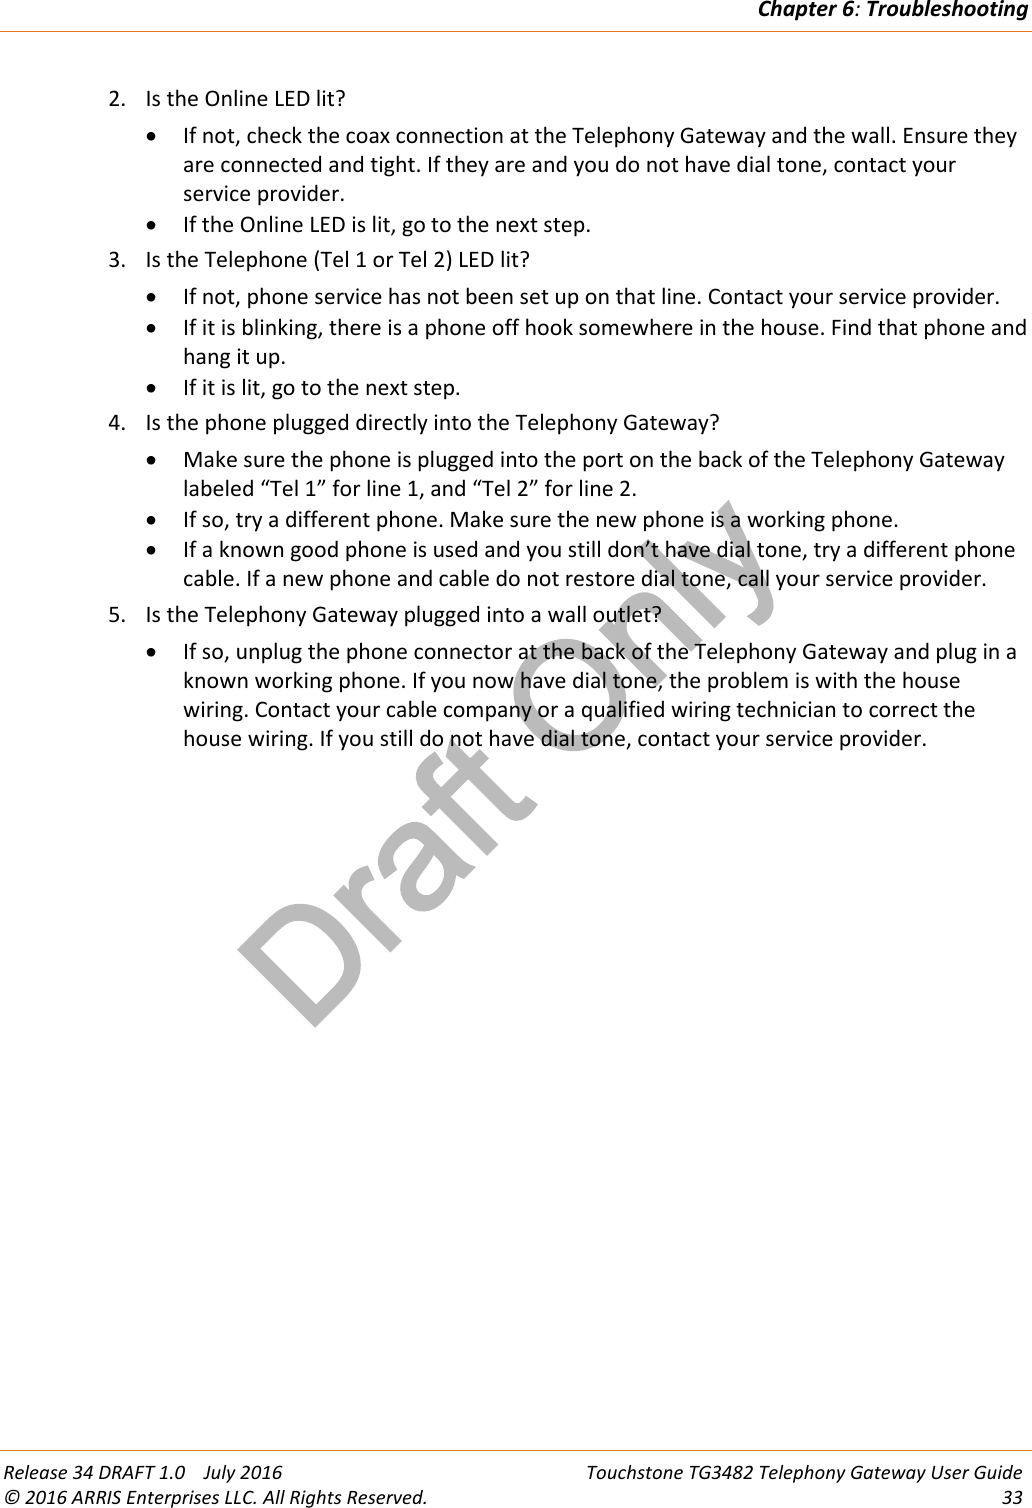 Draft OnlyChapter 6:TroubleshootingRelease 34 DRAFT 1.0 July 2016 Touchstone TG3482 Telephony Gateway User Guide© 2016 ARRIS Enterprises LLC. All Rights Reserved. 332. Is the Online LED lit?If not, check the coax connection at the Telephony Gateway and the wall. Ensure theyare connected and tight. If they are and you do not have dial tone, contact yourservice provider.If the Online LED is lit, go to the next step.3. Is the Telephone (Tel 1 or Tel 2) LED lit?If not, phone service has not been set up on that line. Contact your service provider.If it is blinking, there is a phone off hook somewhere in the house. Find that phone andhang it up.If it is lit, go to the next step.4. Is the phone plugged directly into the Telephony Gateway?Make sure the phone is plugged into the port on the back of the Telephony Gatewaylabeled “Tel 1” for line 1, and “Tel 2” for line 2.If so, try a different phone. Make sure the new phone is a working phone.If a known good phone is used and you still don’t have dial tone, try a different phonecable. If a new phone and cable do not restore dial tone, call your service provider.5. Is the Telephony Gateway plugged into a wall outlet?If so, unplug the phone connector at the back of the Telephony Gateway and plug in aknown working phone. If you now have dial tone, the problem is with the housewiring. Contact your cable company or a qualified wiring technician to correct thehouse wiring. If you still do not have dial tone, contact your service provider.